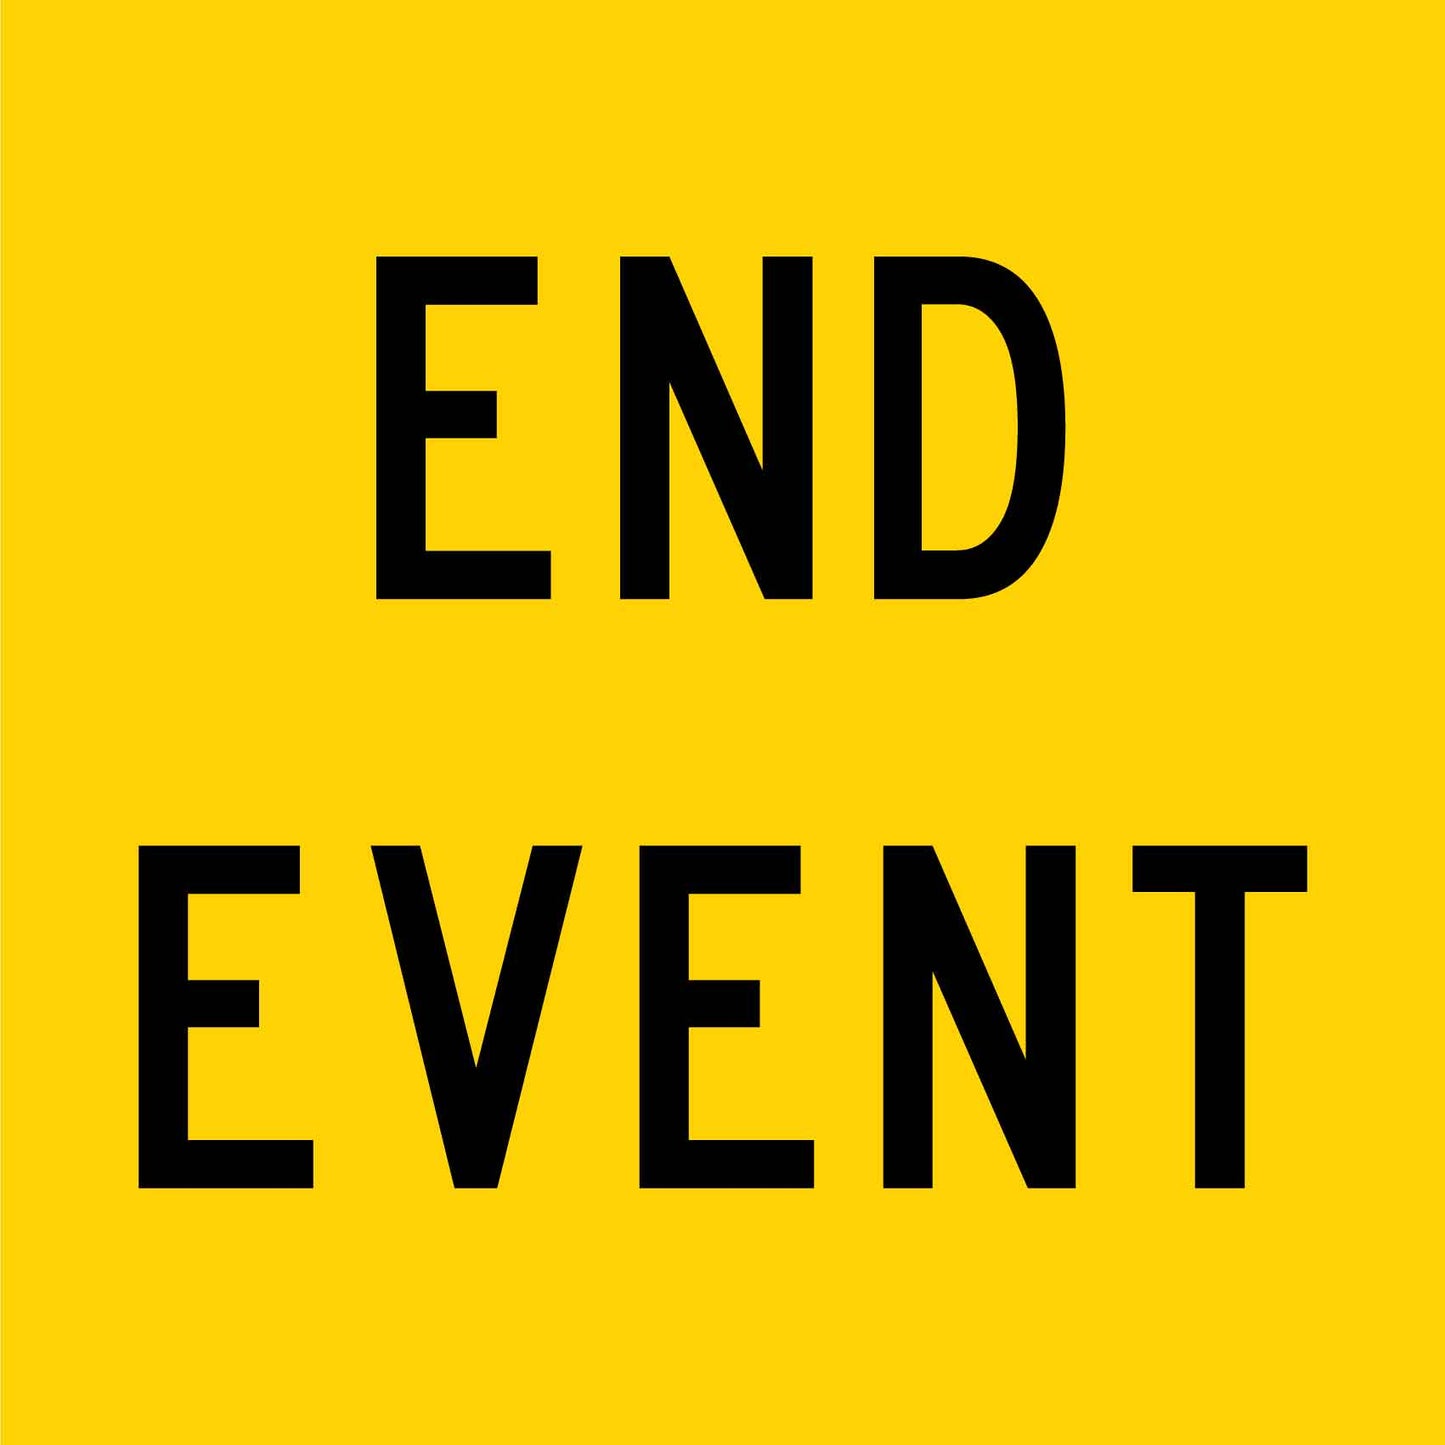 End Event Multi Message Reflective Traffic Sign